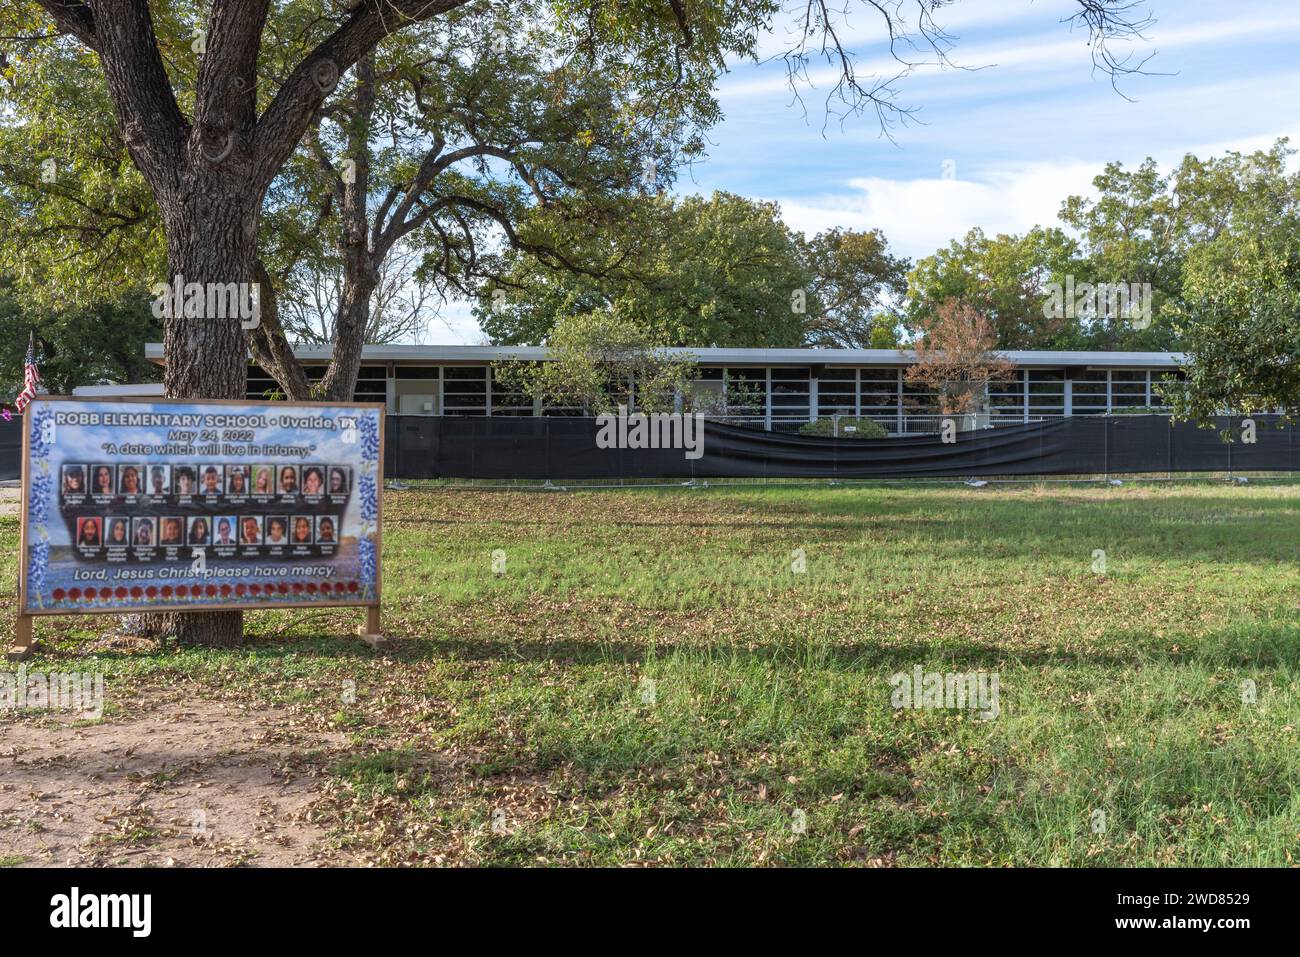 Robb Elementary School fenced in after tragic school shooting, a billboard memorial out front with photos of victims, Uvalde, Texas, USA. Stock Photo